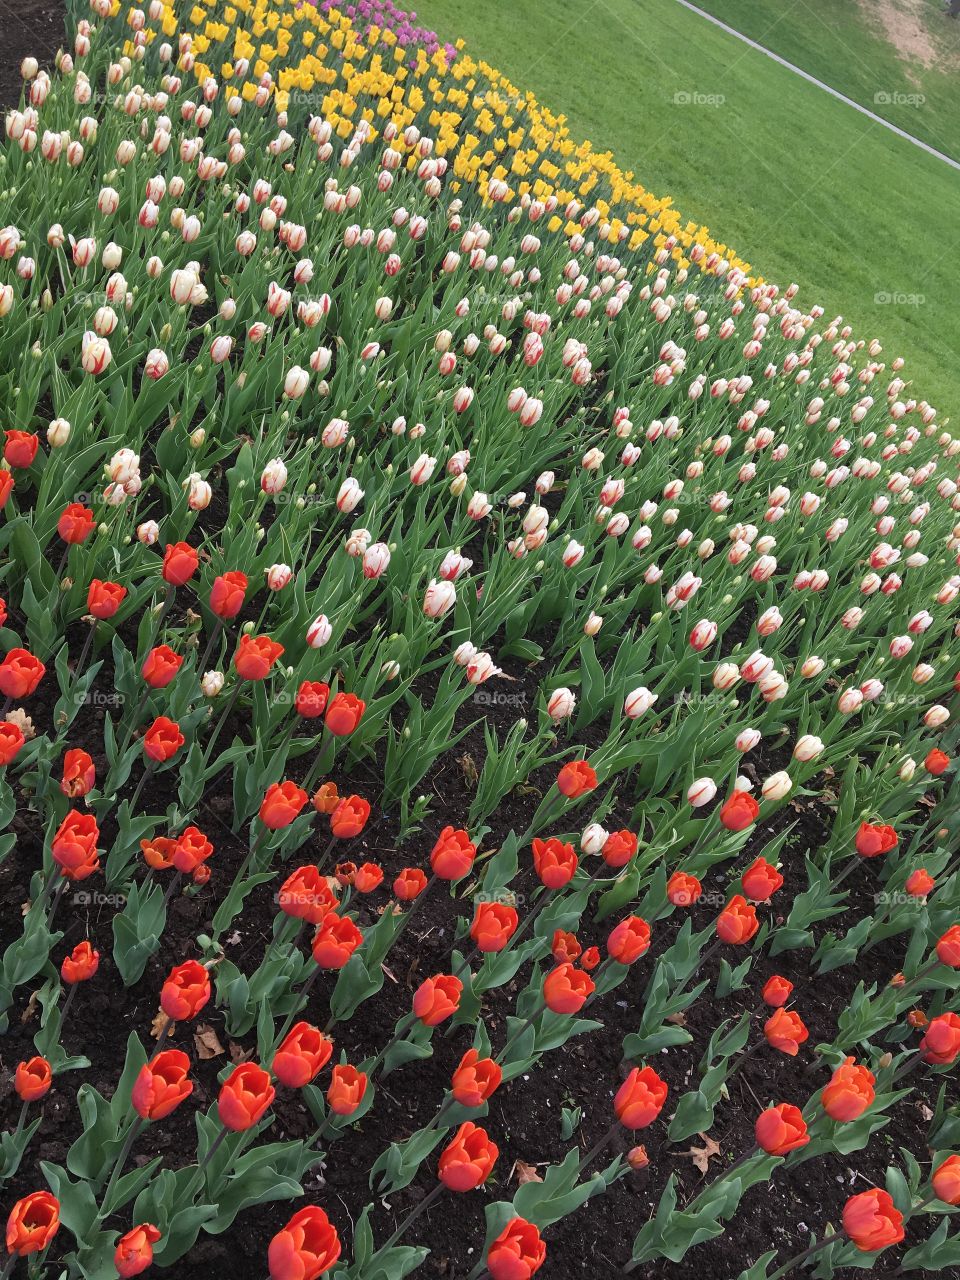 Tons of yellow white and red tulips